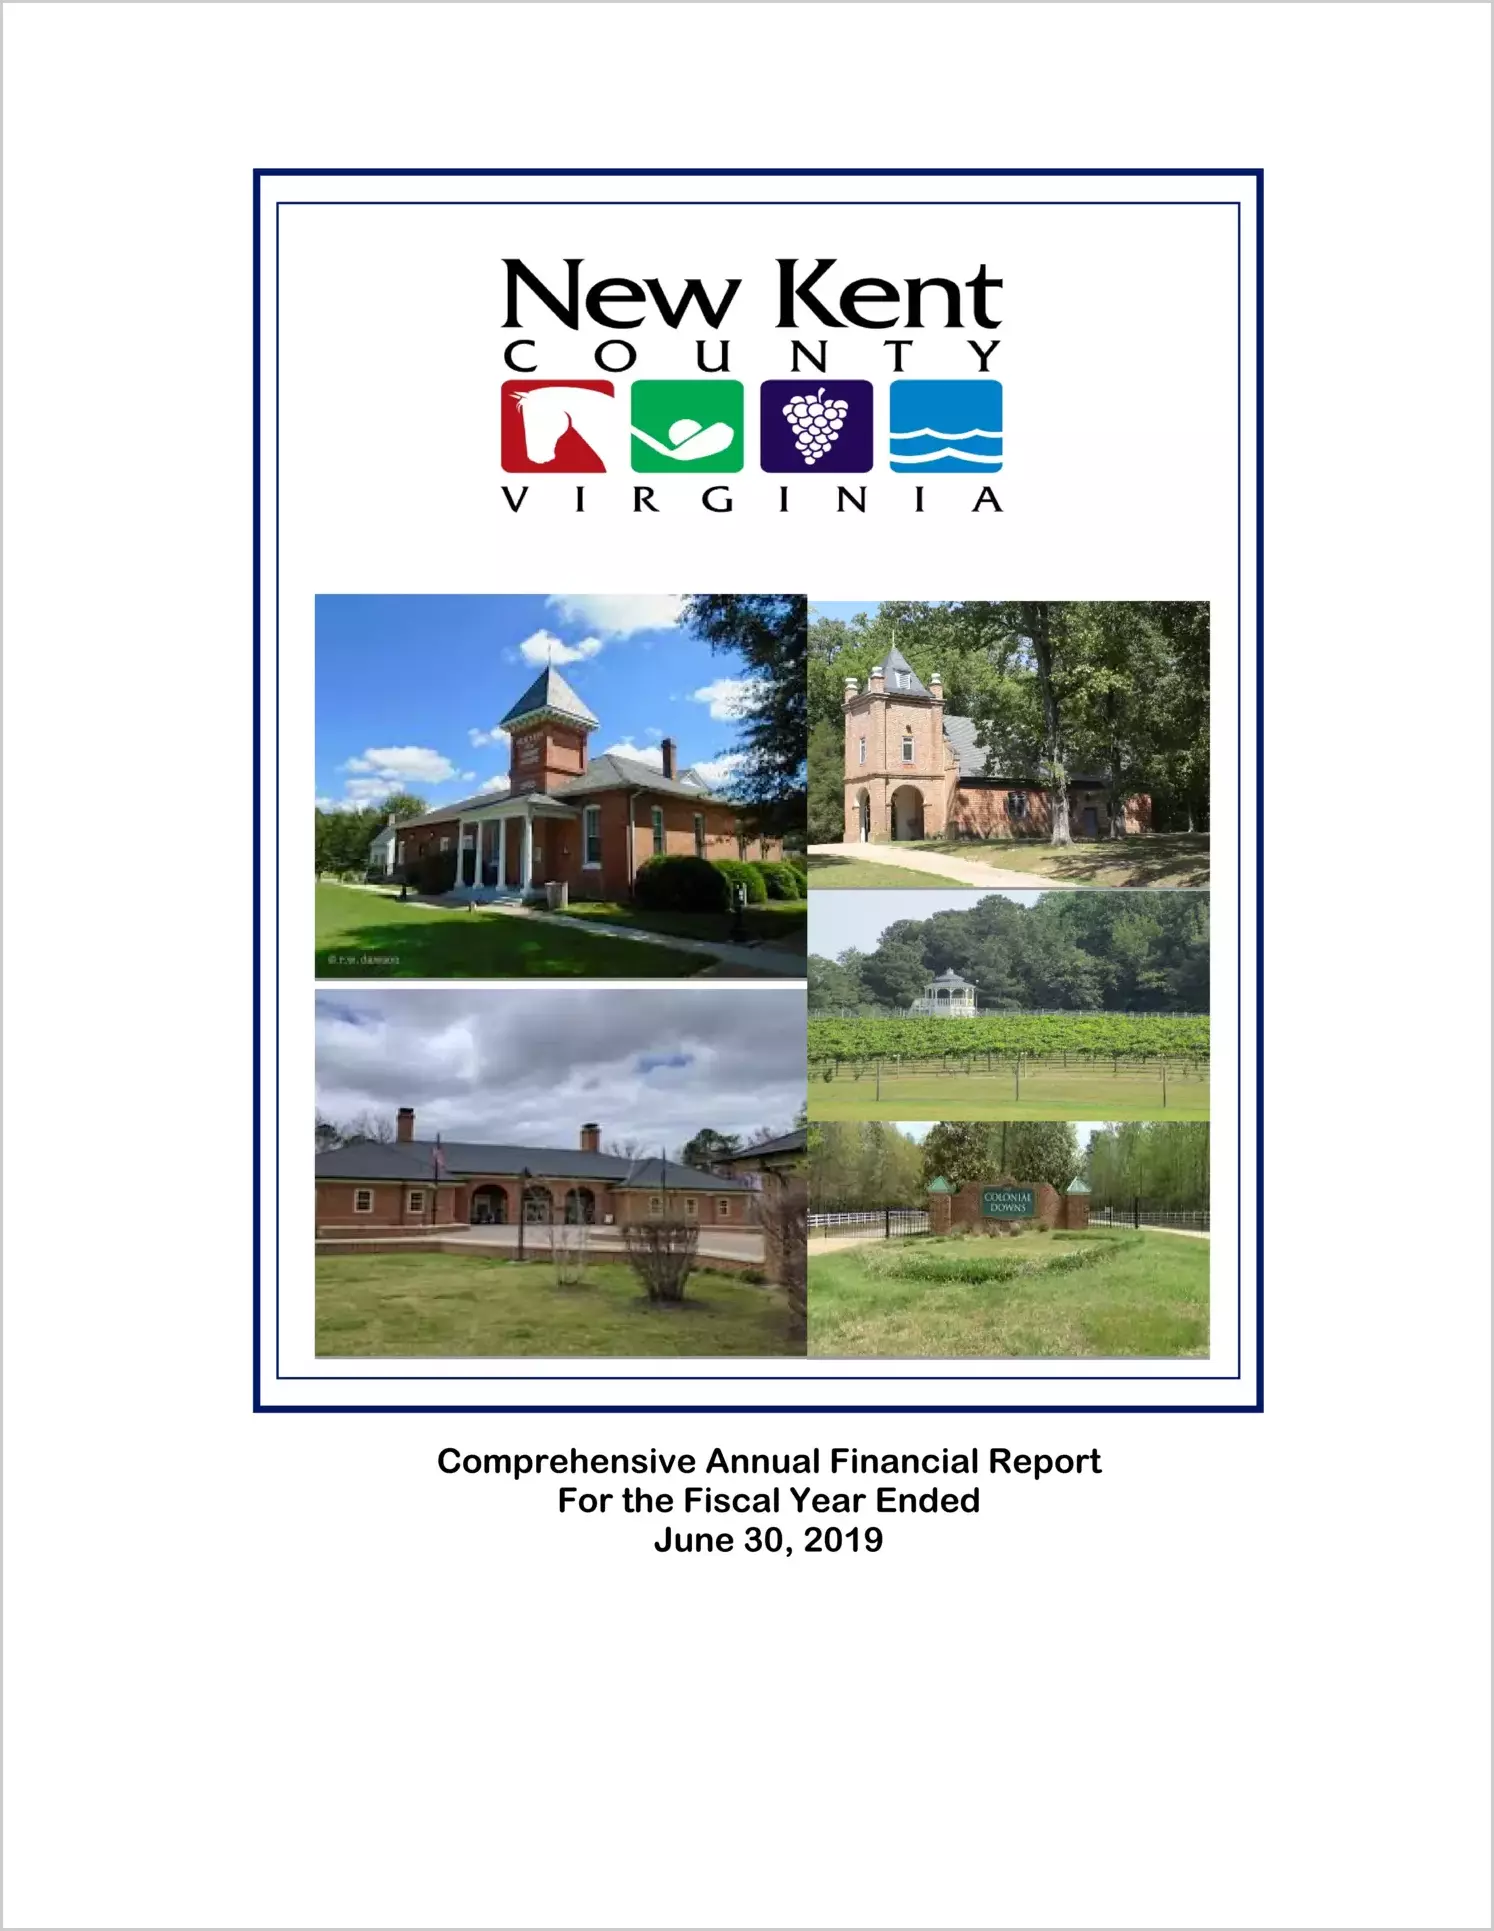 2019 Annual Financial Report for County of New Kent